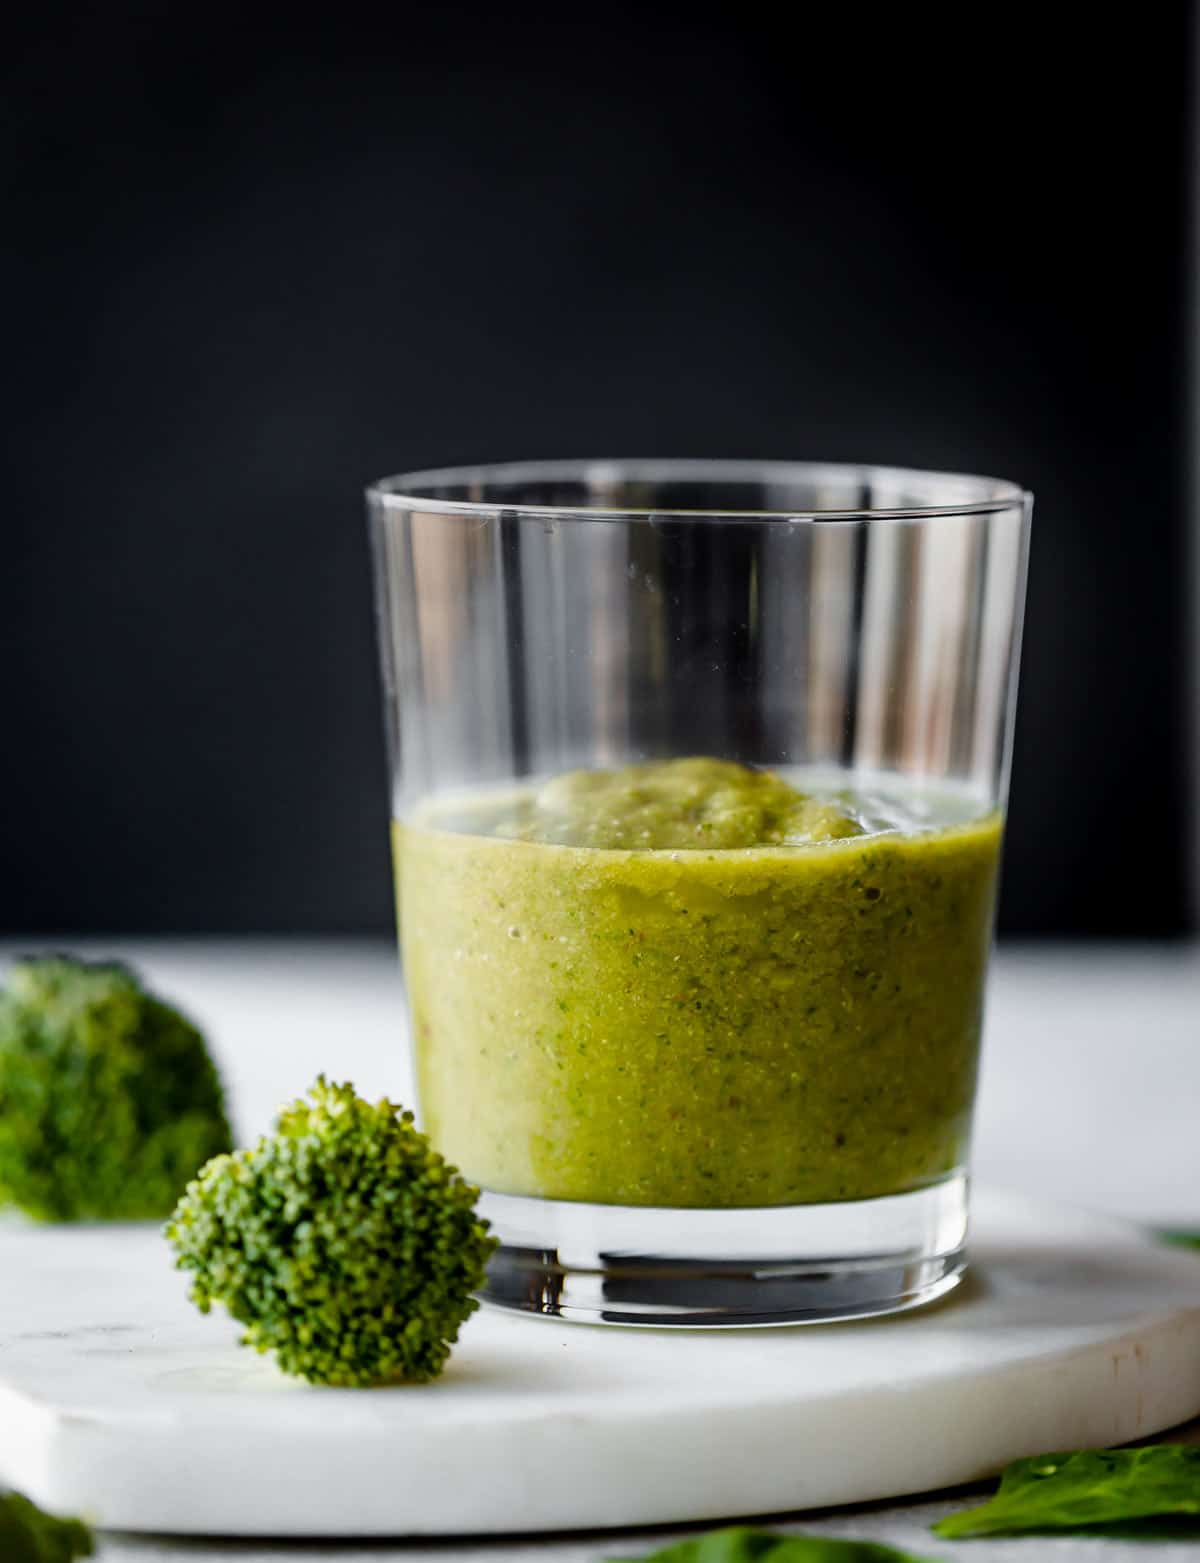 Broccoli Smoothie in a clear cup against a black background.